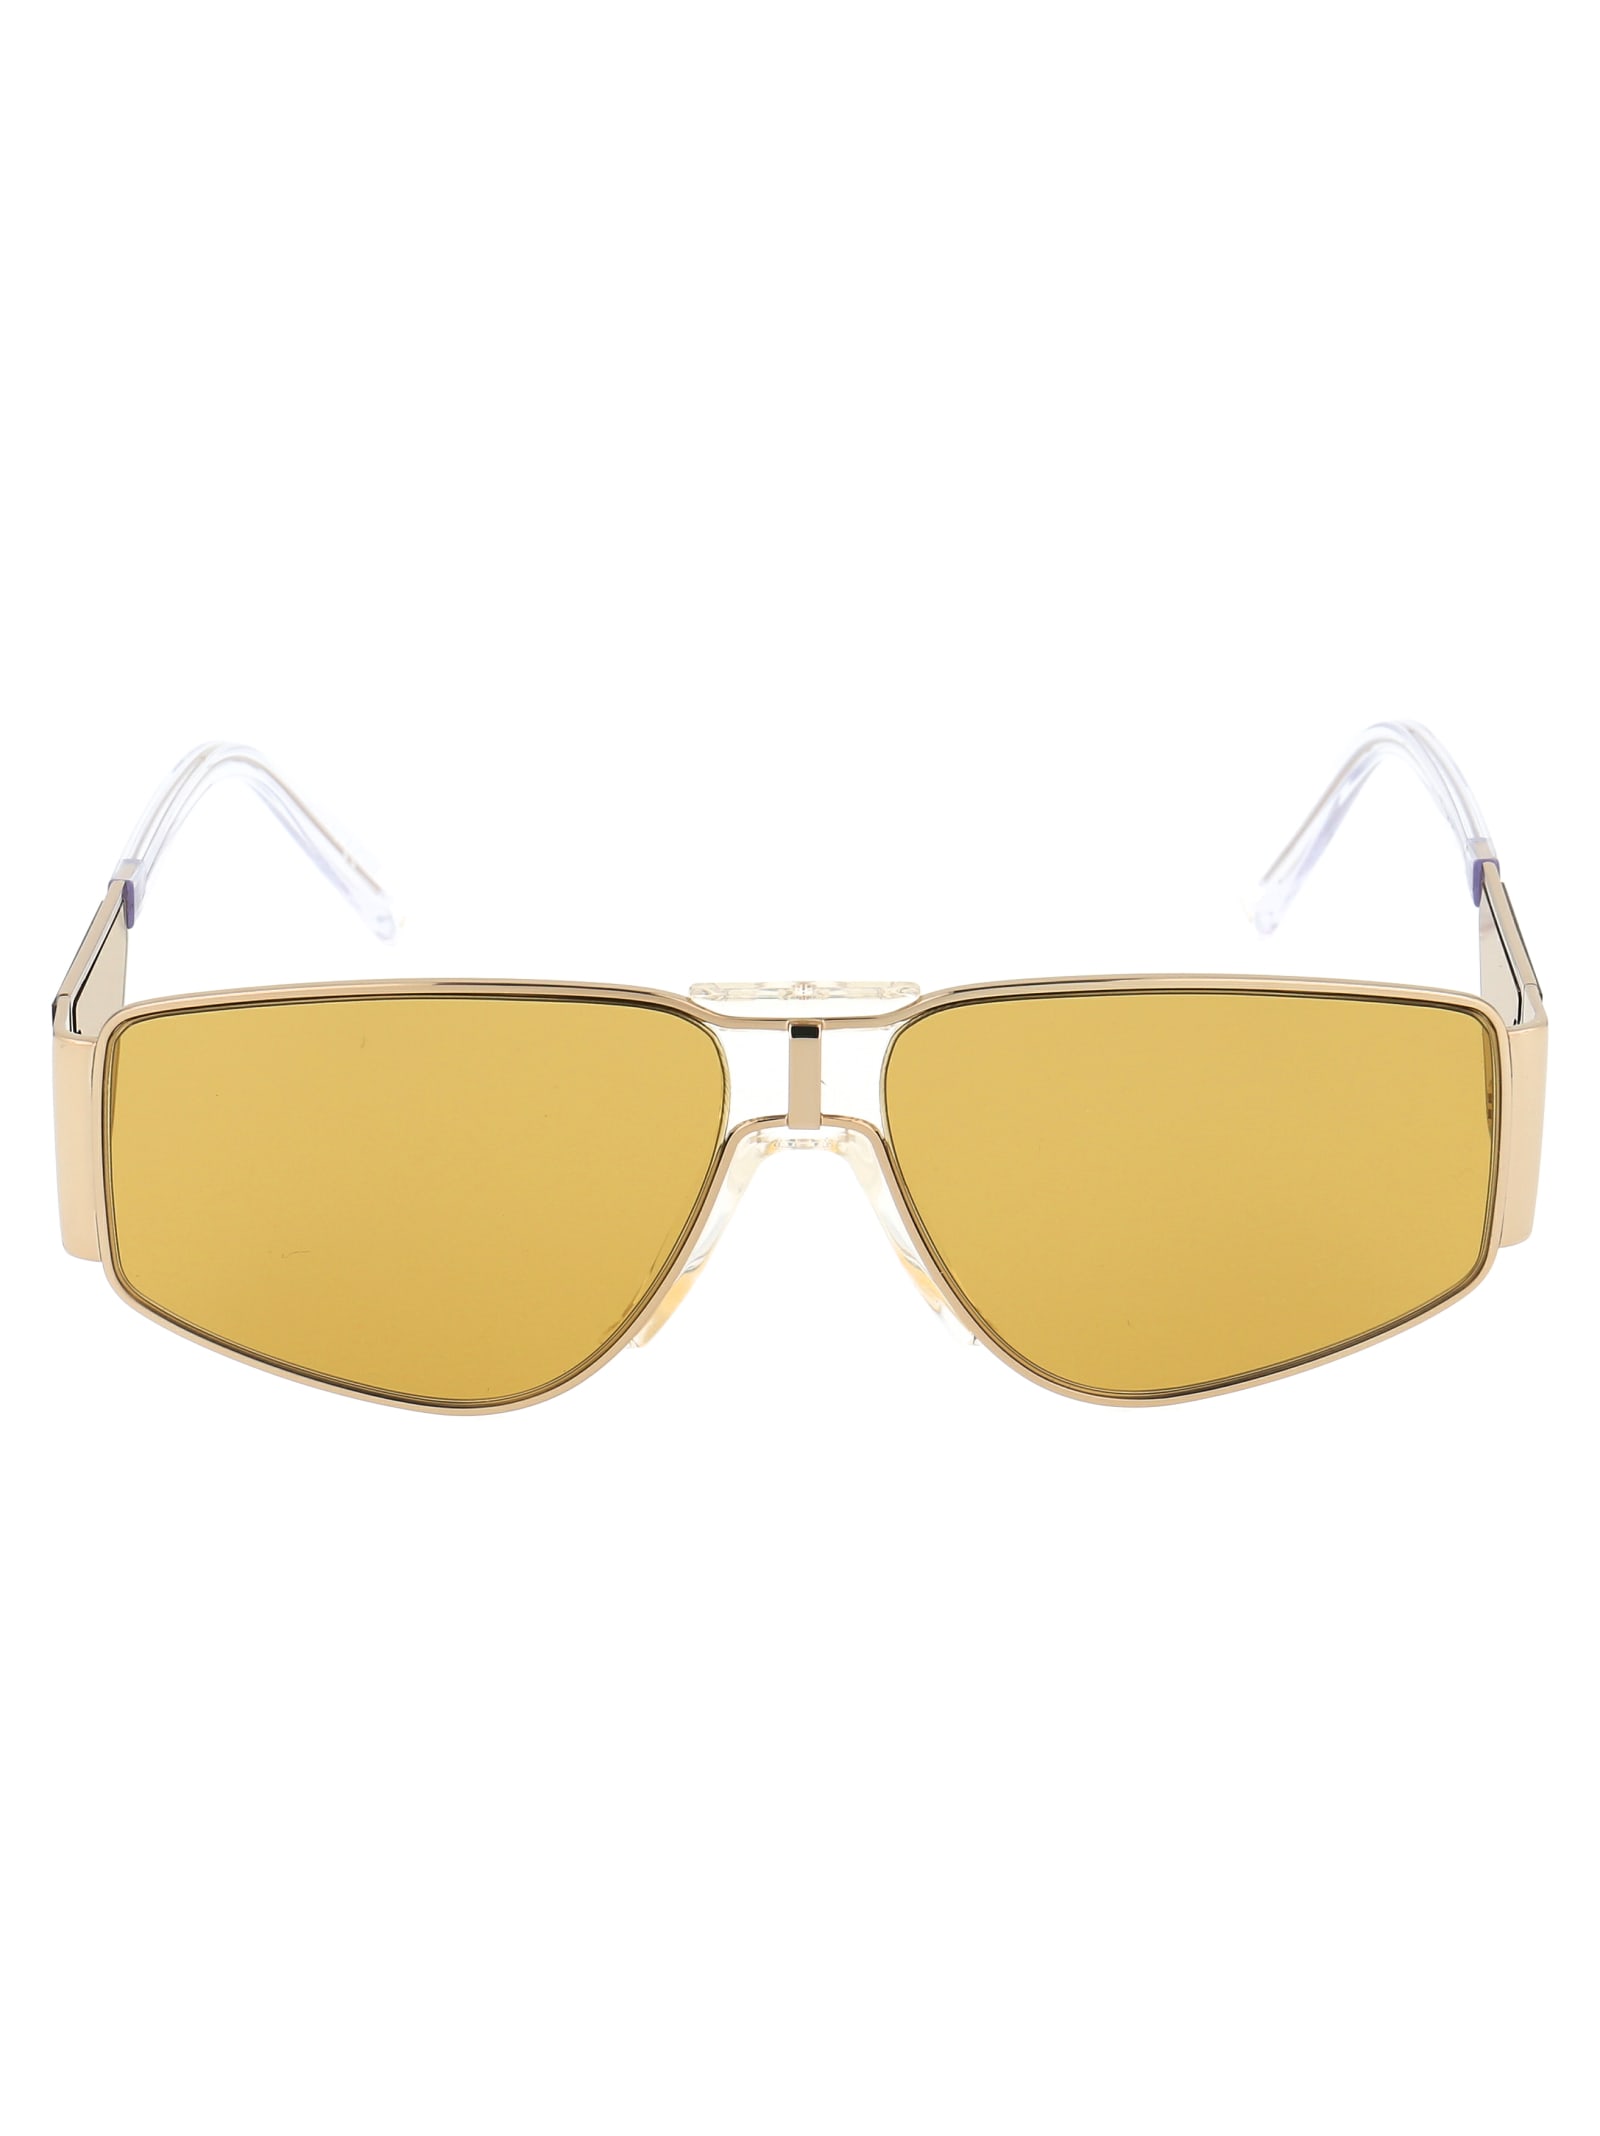 Givenchy Gv 7166/s Sunglasses In Dyg70 Gold Yell | ModeSens